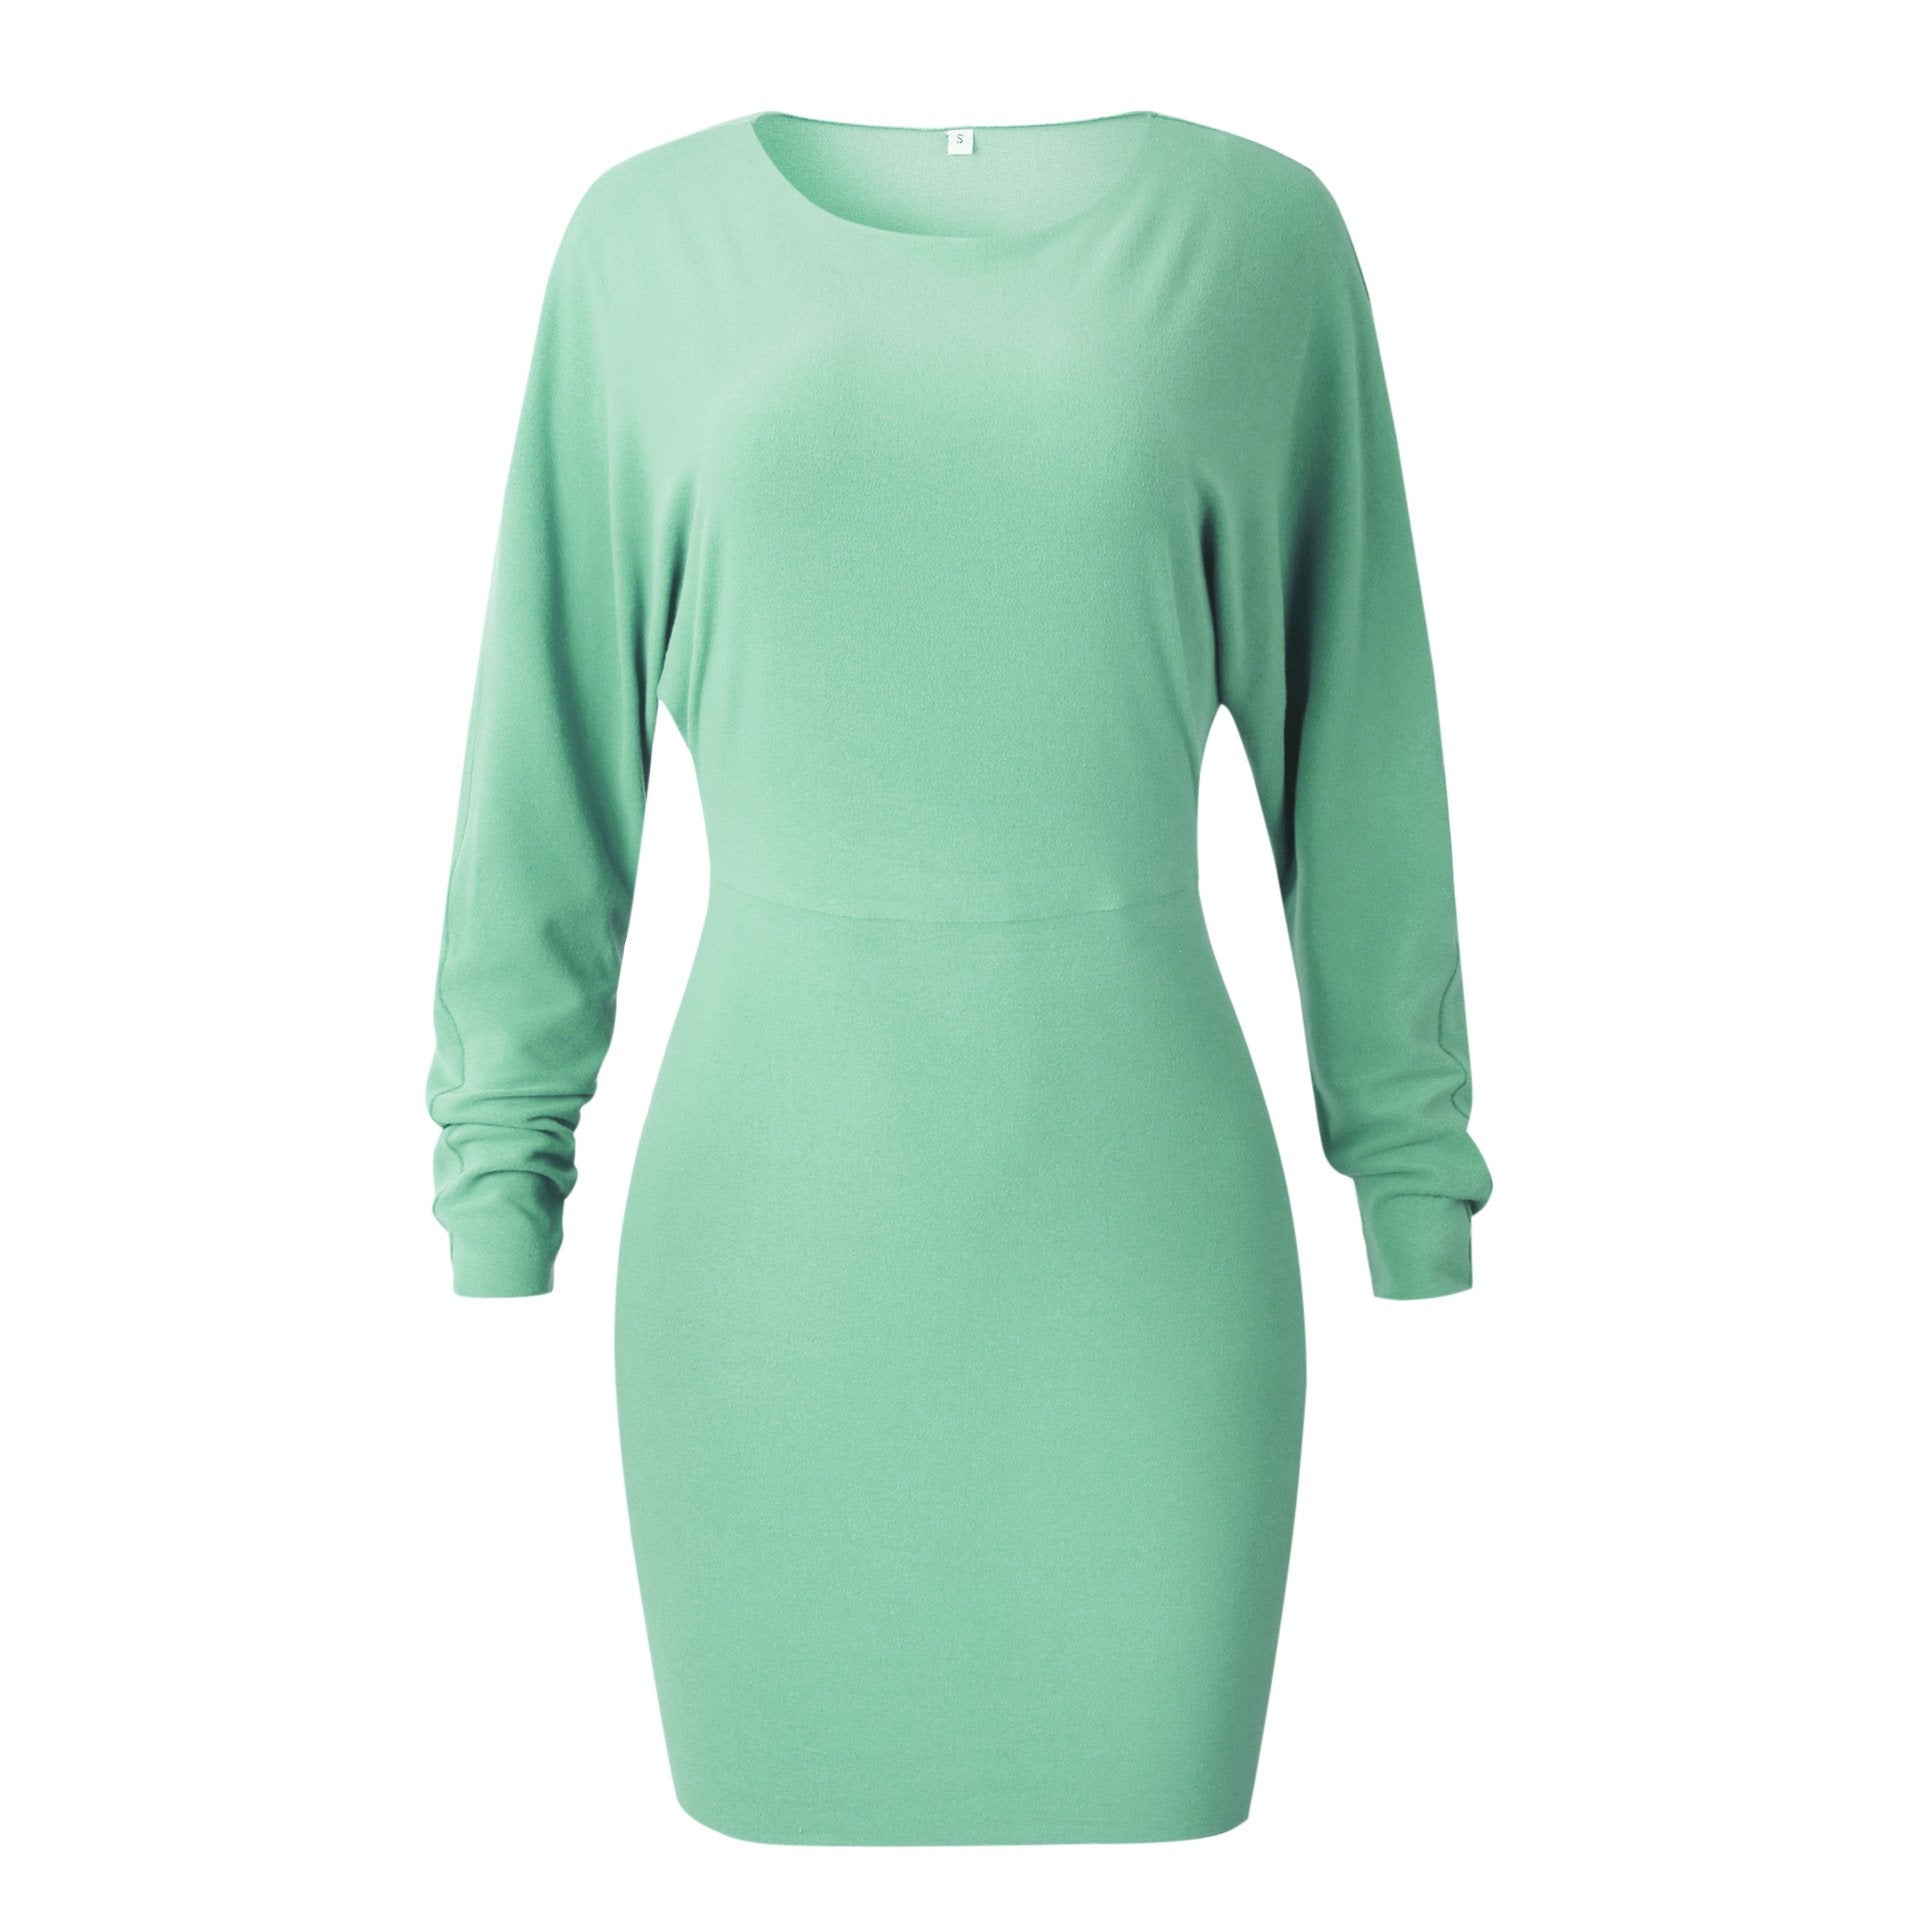 2019 Solid Color Long Sleeves Women Bodycon Short Dress